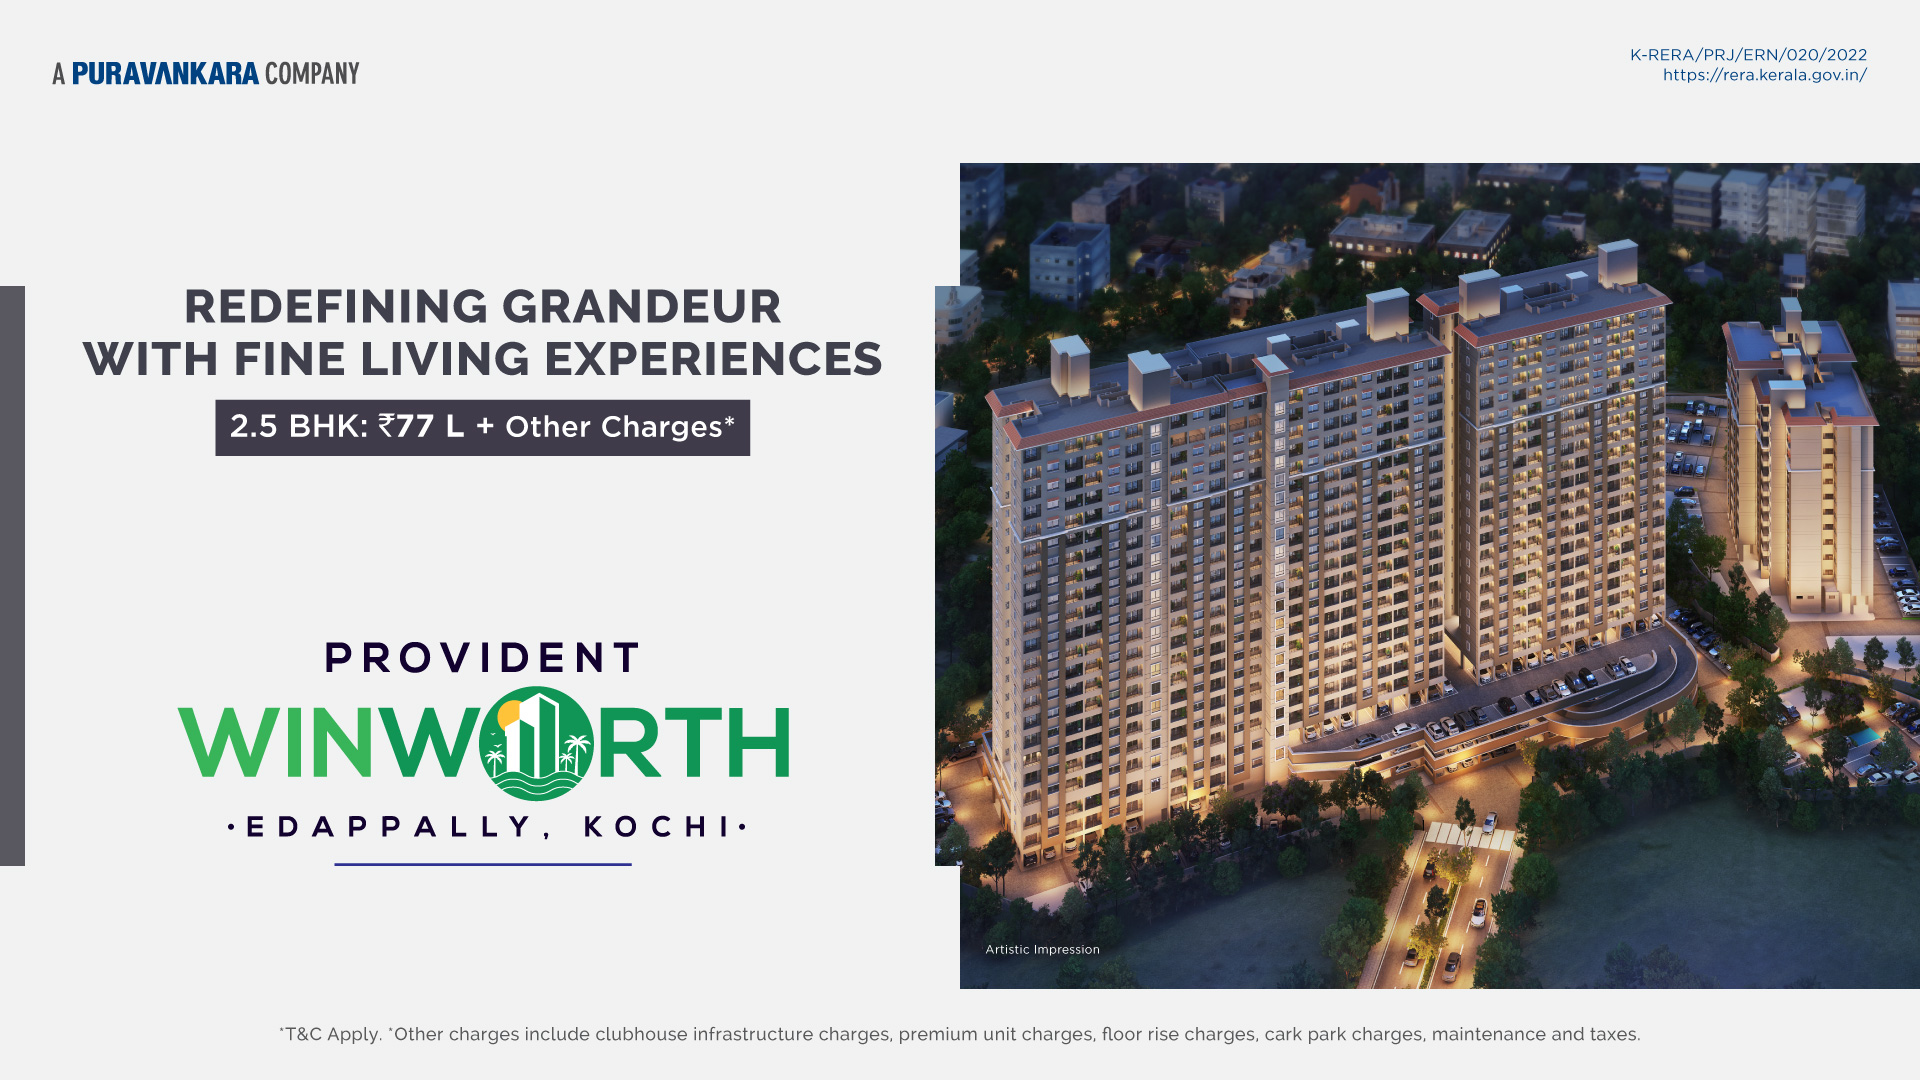 Book 2.5 BHK home Rs 77 Lac and other charges at Provident Winworth in Kochi